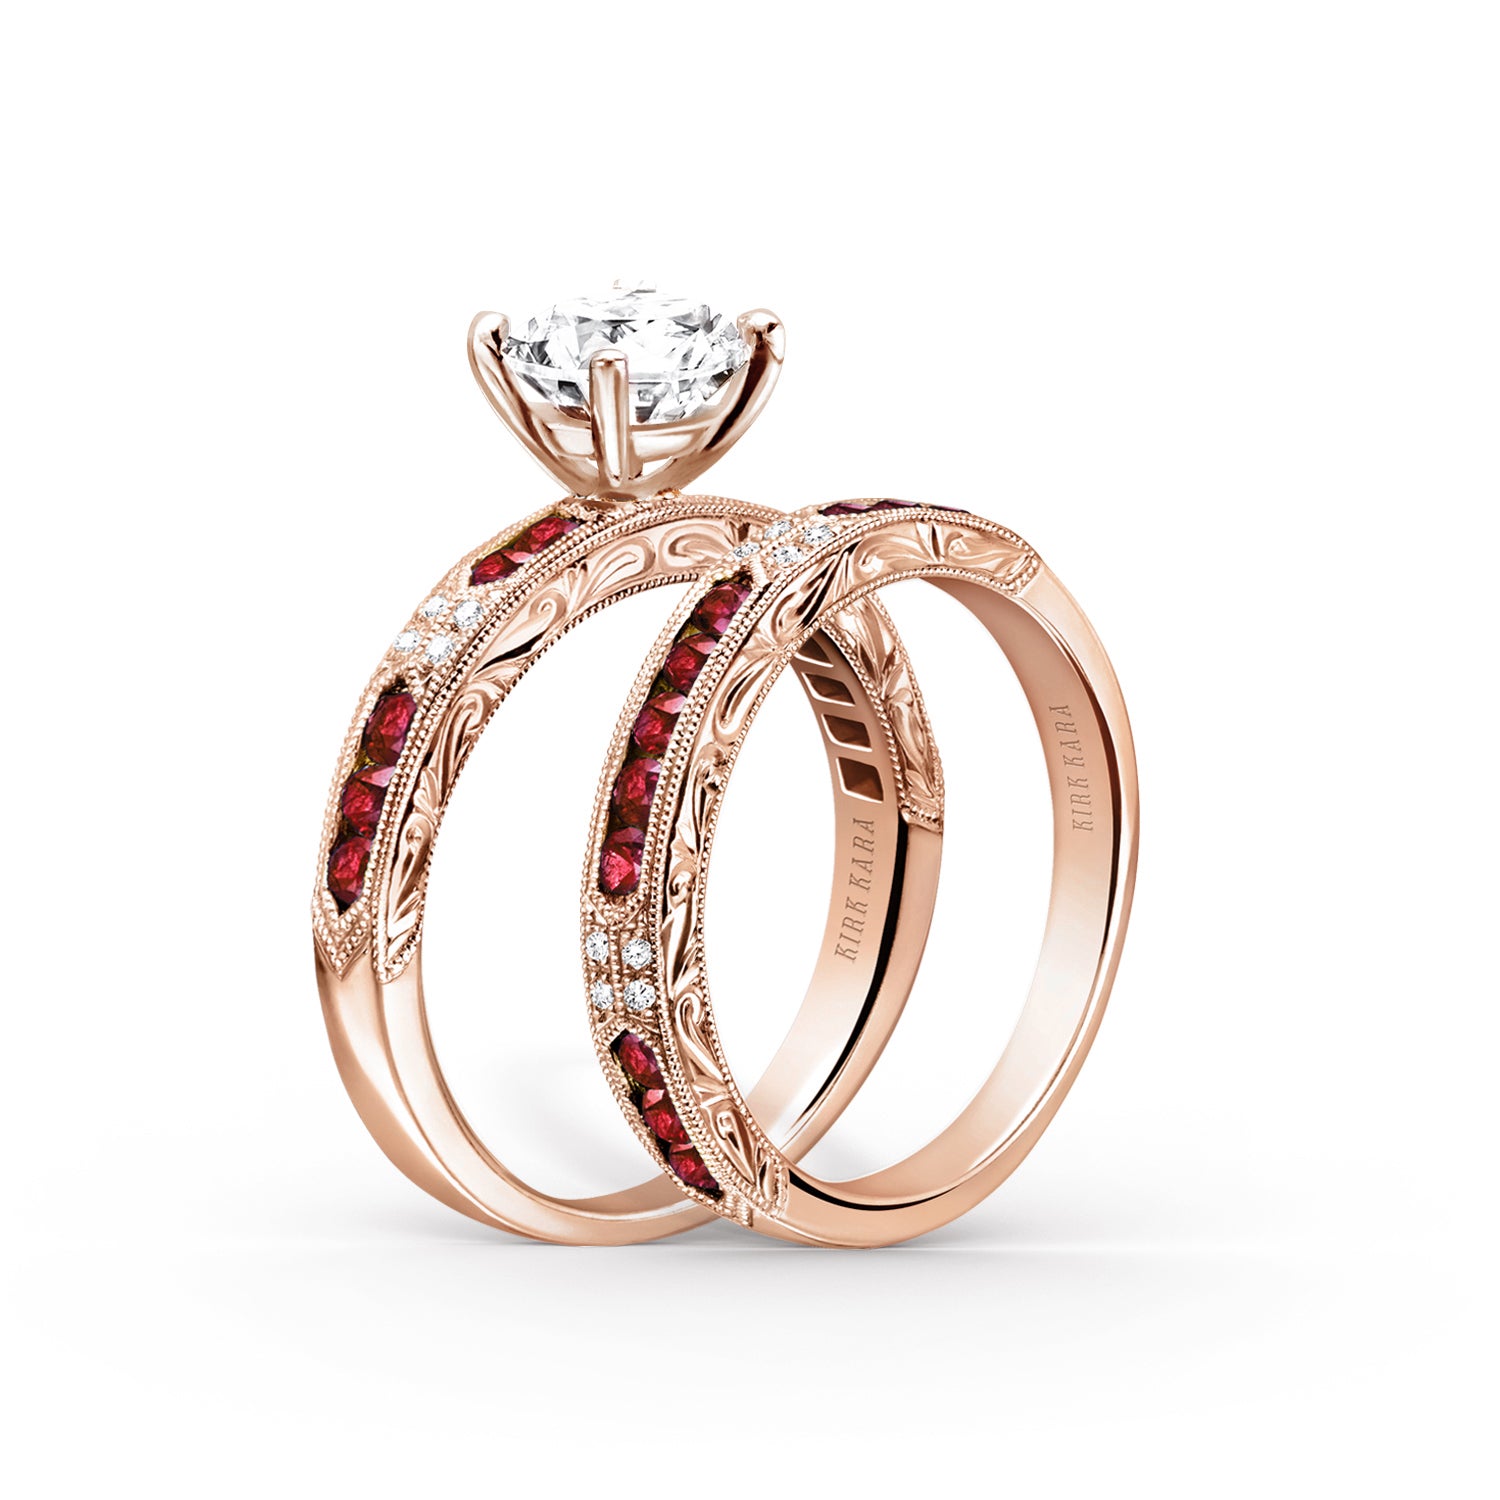 Sophia By Design Rose Gold Red Agate & Diamond Ring 24082 - DECOR Jewelry